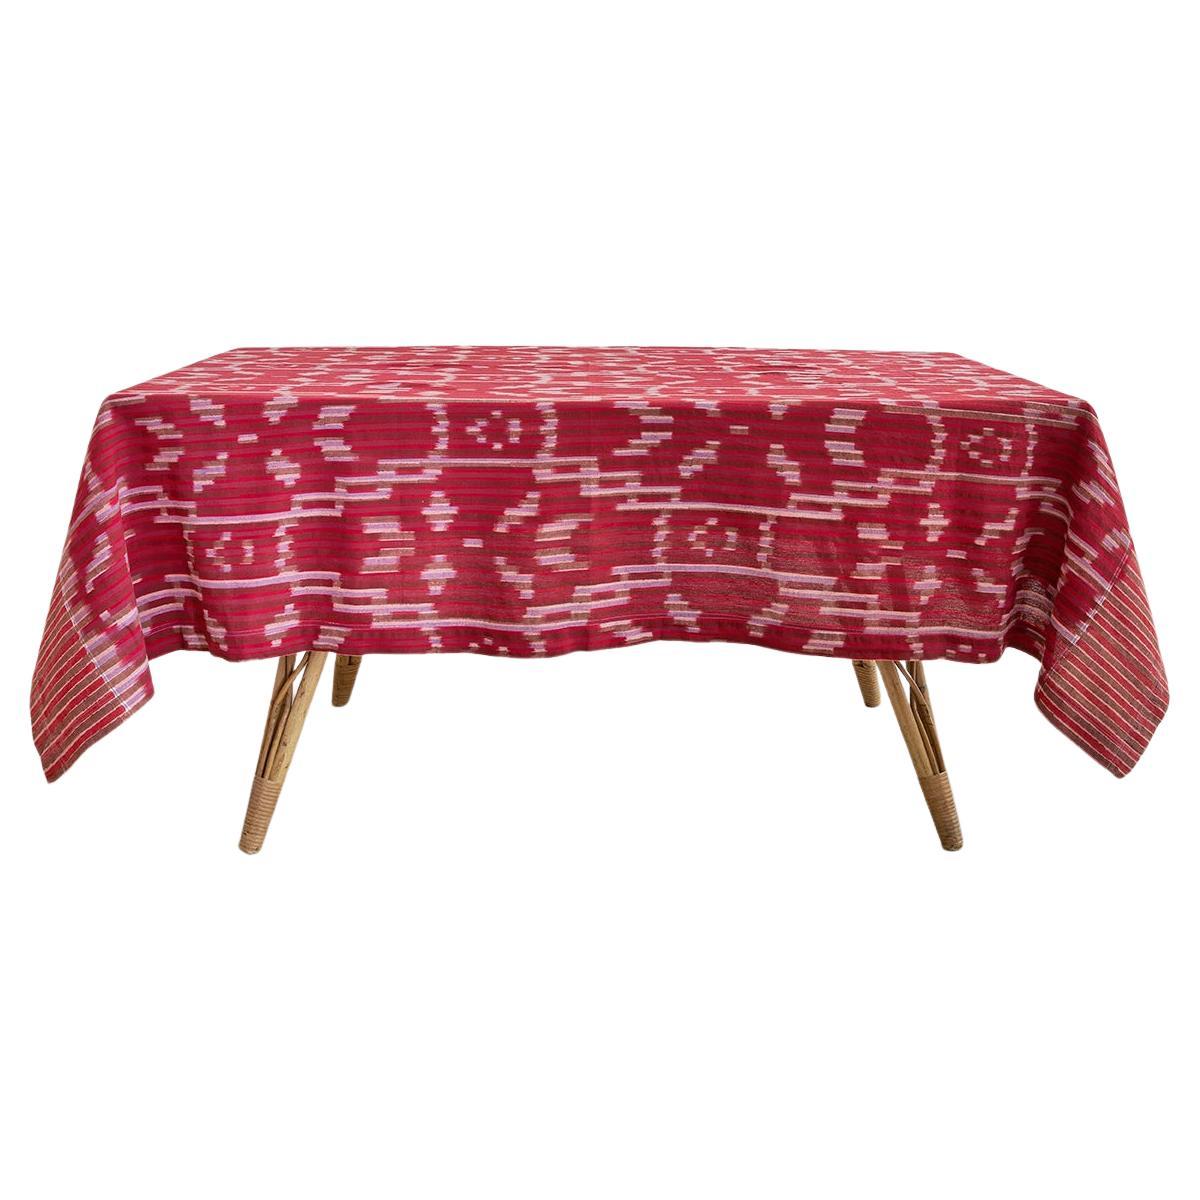 Contemporary Gregory Parkinson Tablecloth Red Pink Ikat Hand-Blocked Patterns For Sale